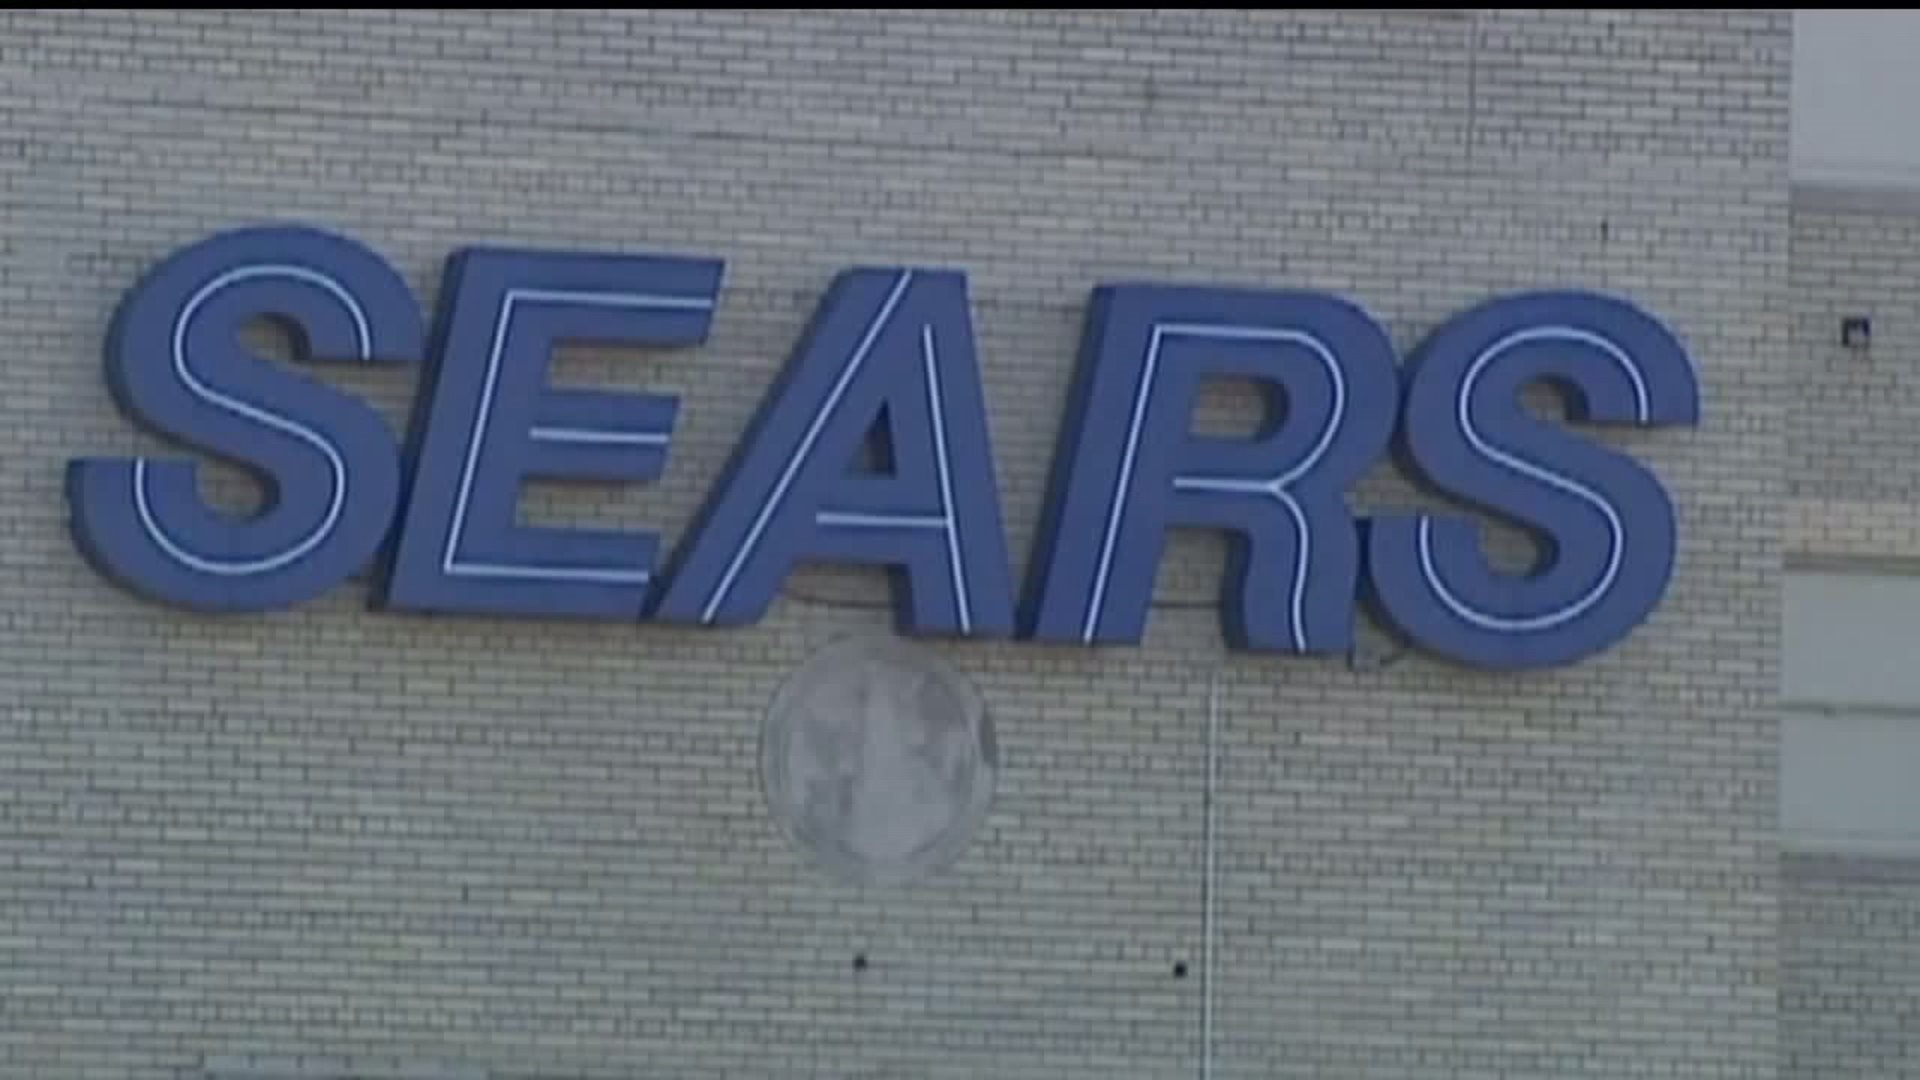 Sears is closing 20 more stores